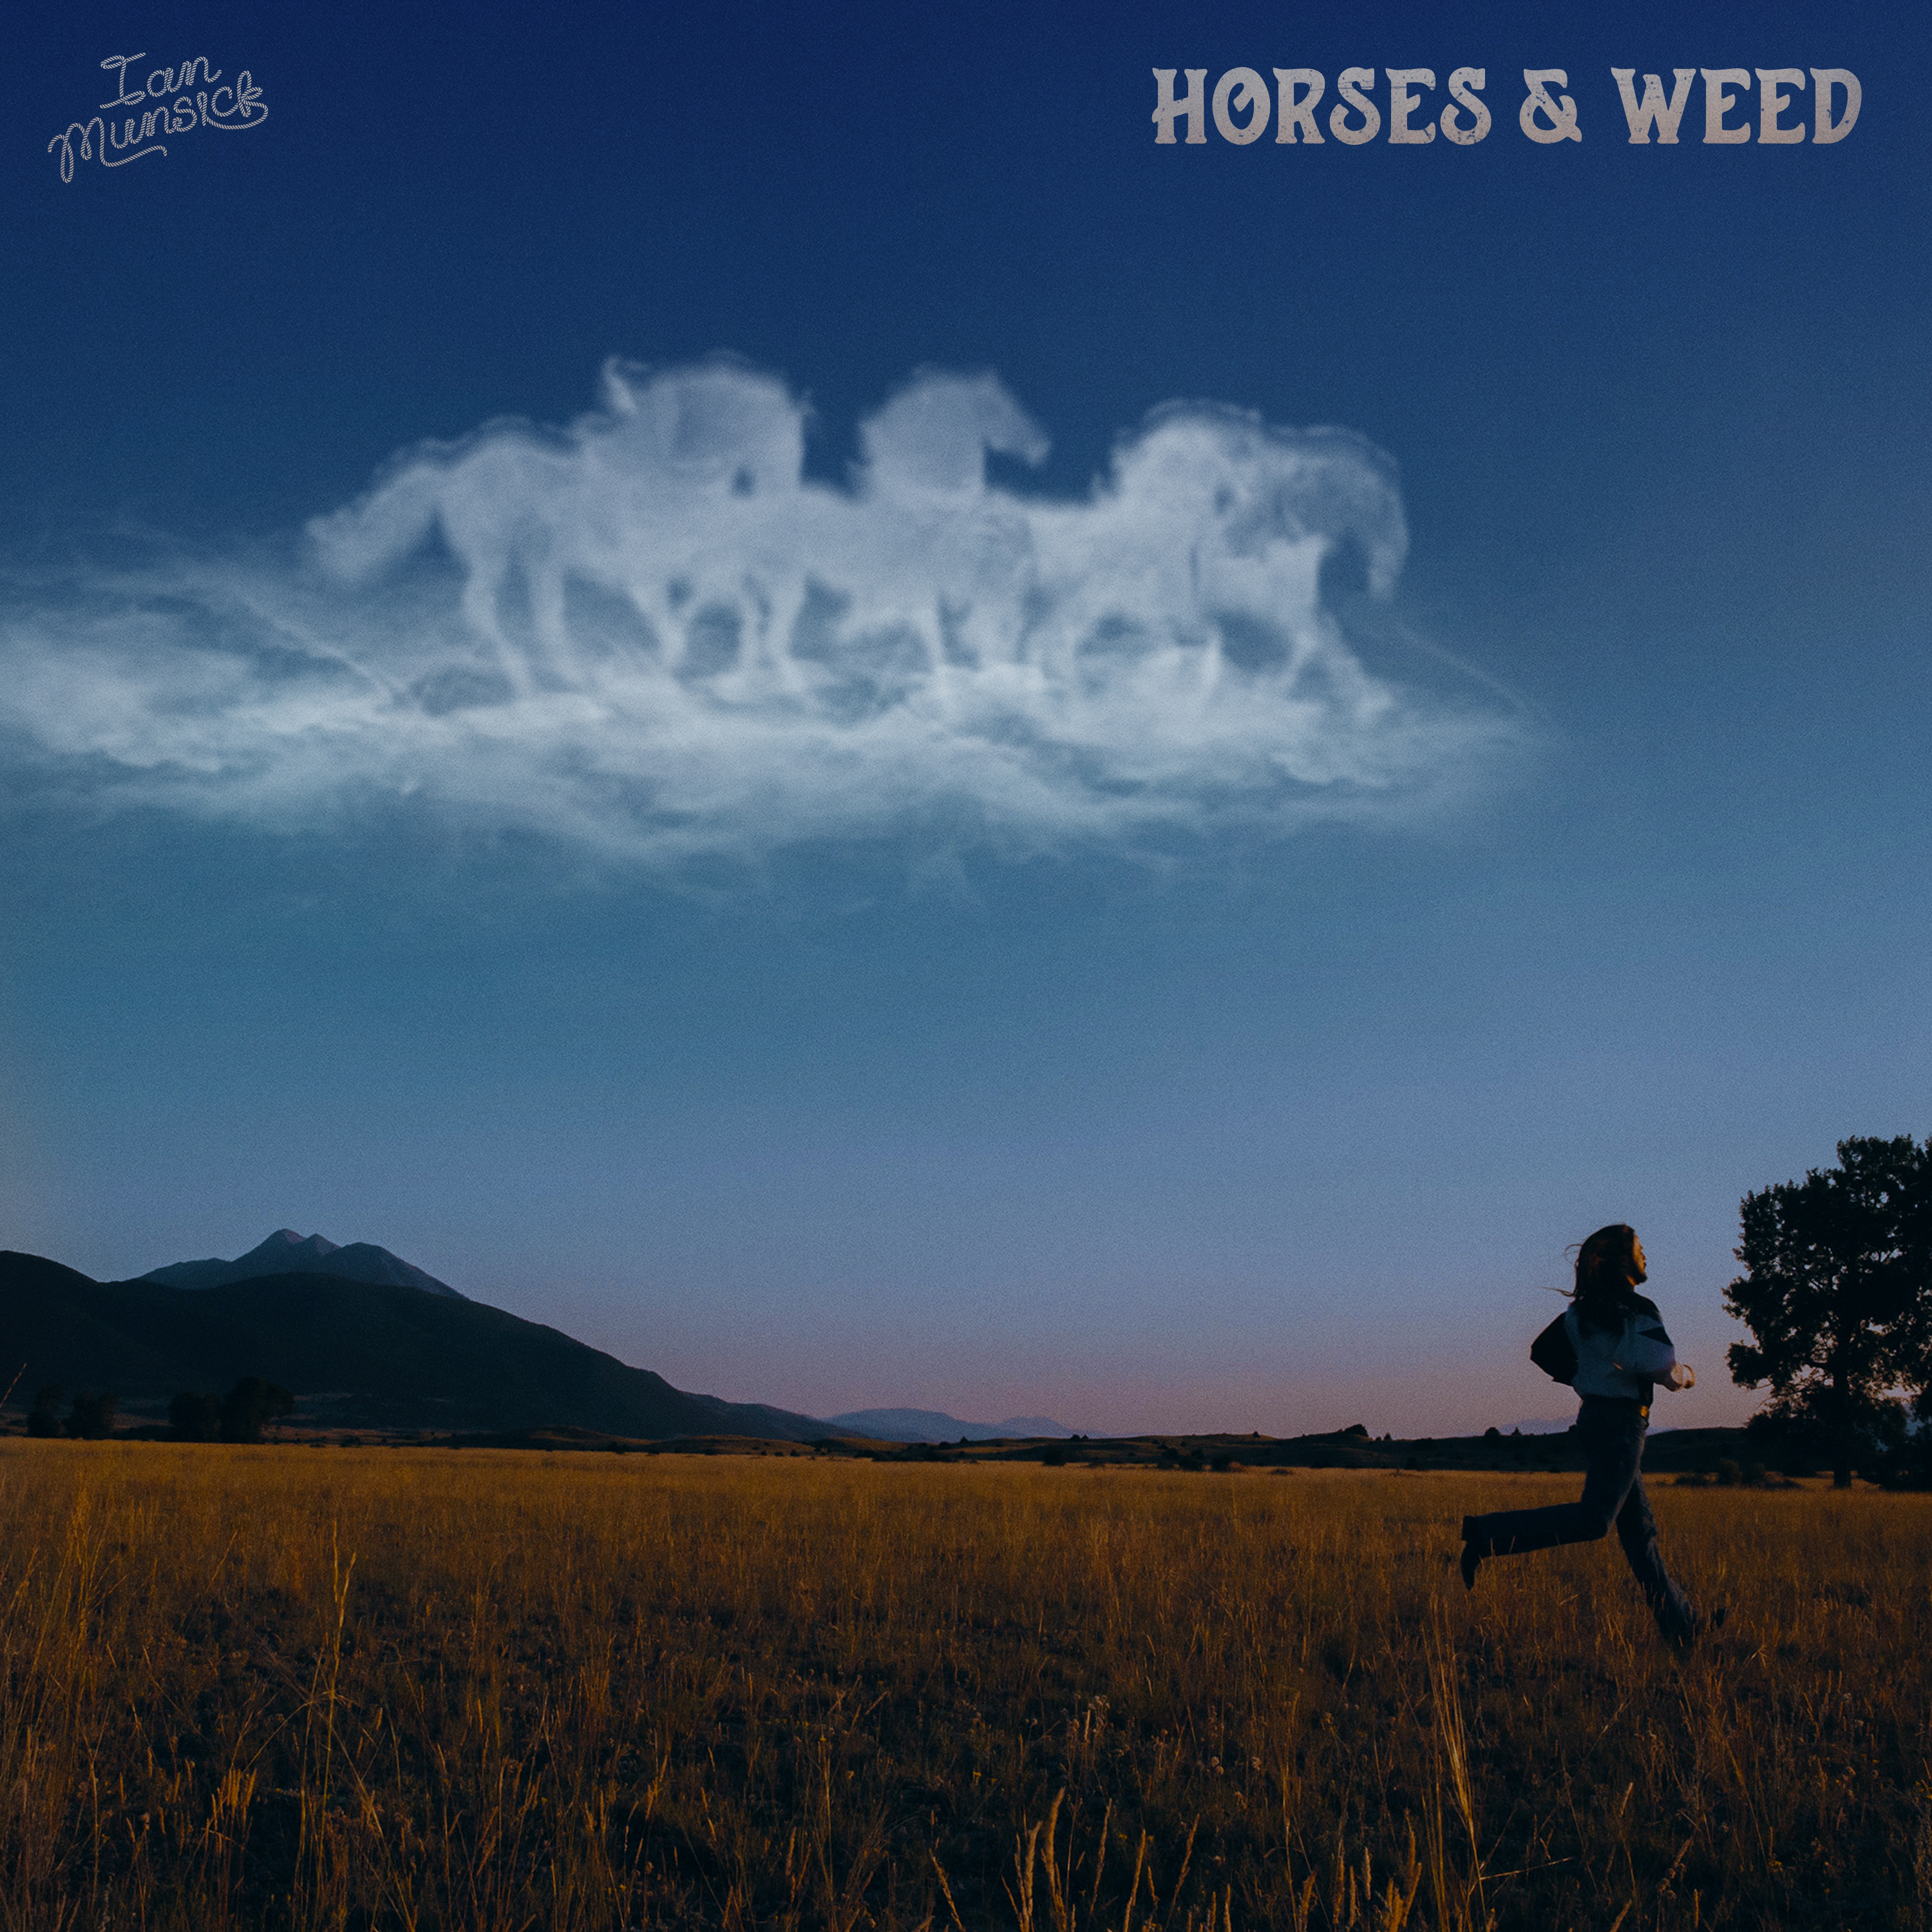 ALL HE NEEDS IS “HORSES & WEED” –  IAN MUNSICK RELEASES NEW TRACK, AVAILABLE NOW